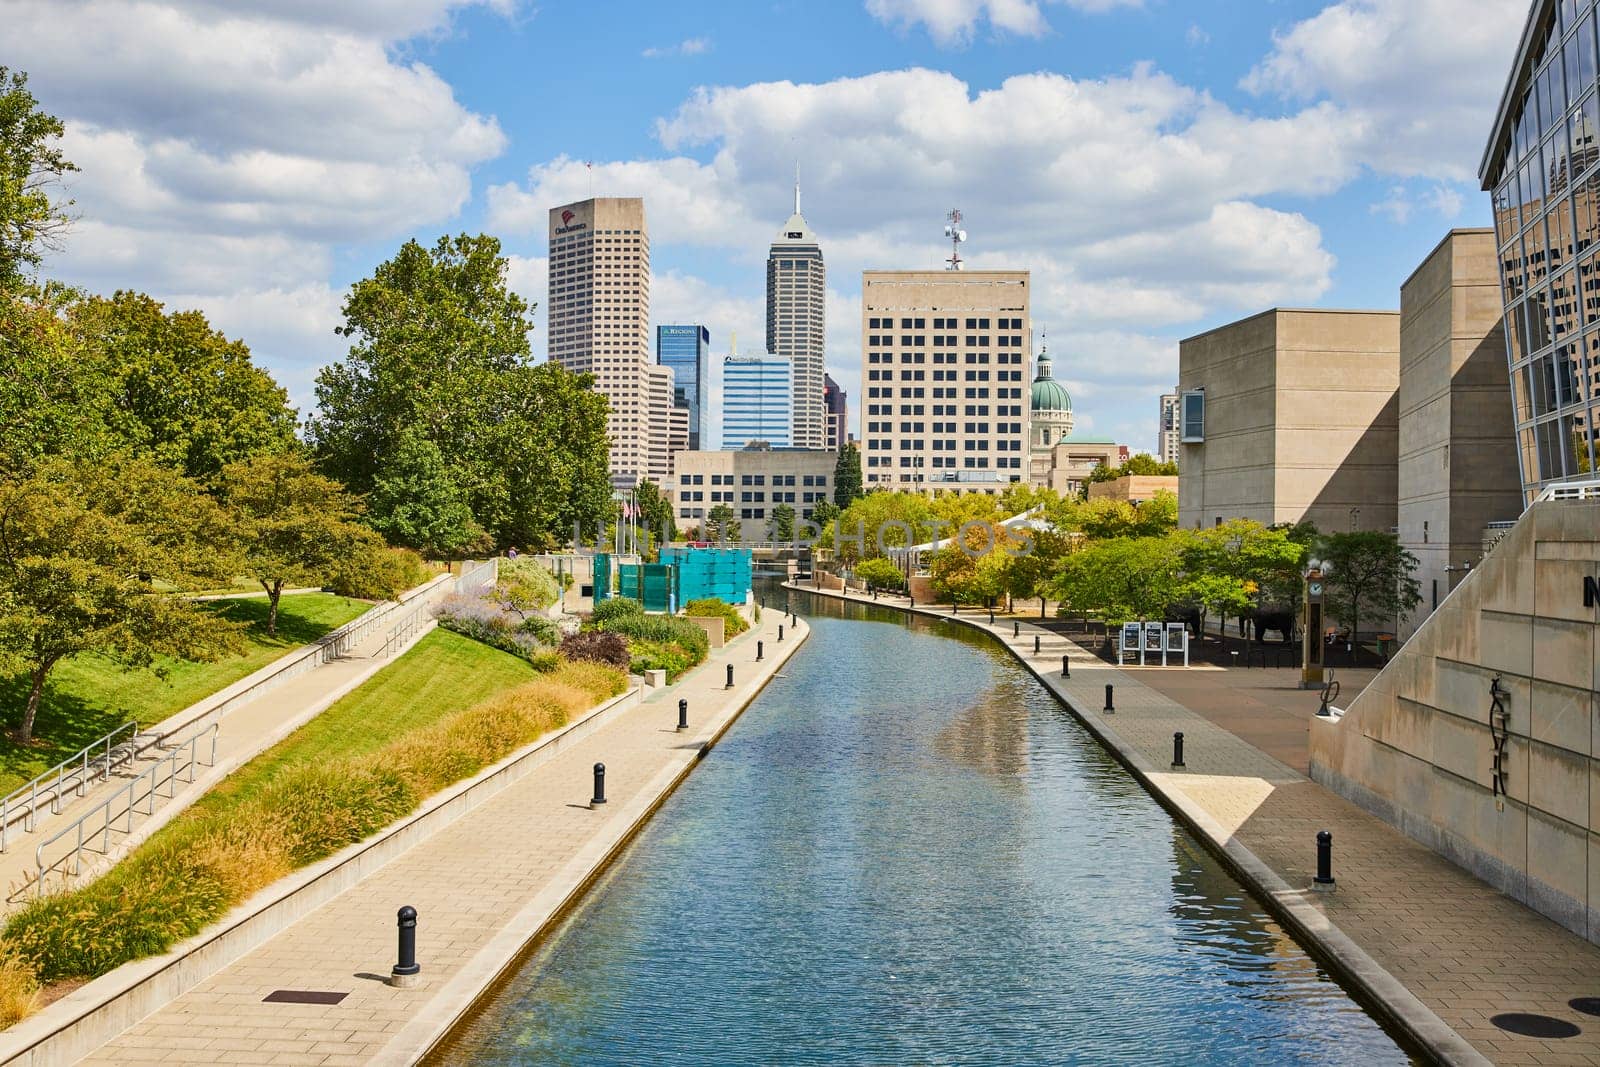 Vibrant daytime cityscape of Indianapolis 2023, featuring a tranquil canal, lush greenery, and diverse architectural skyline.